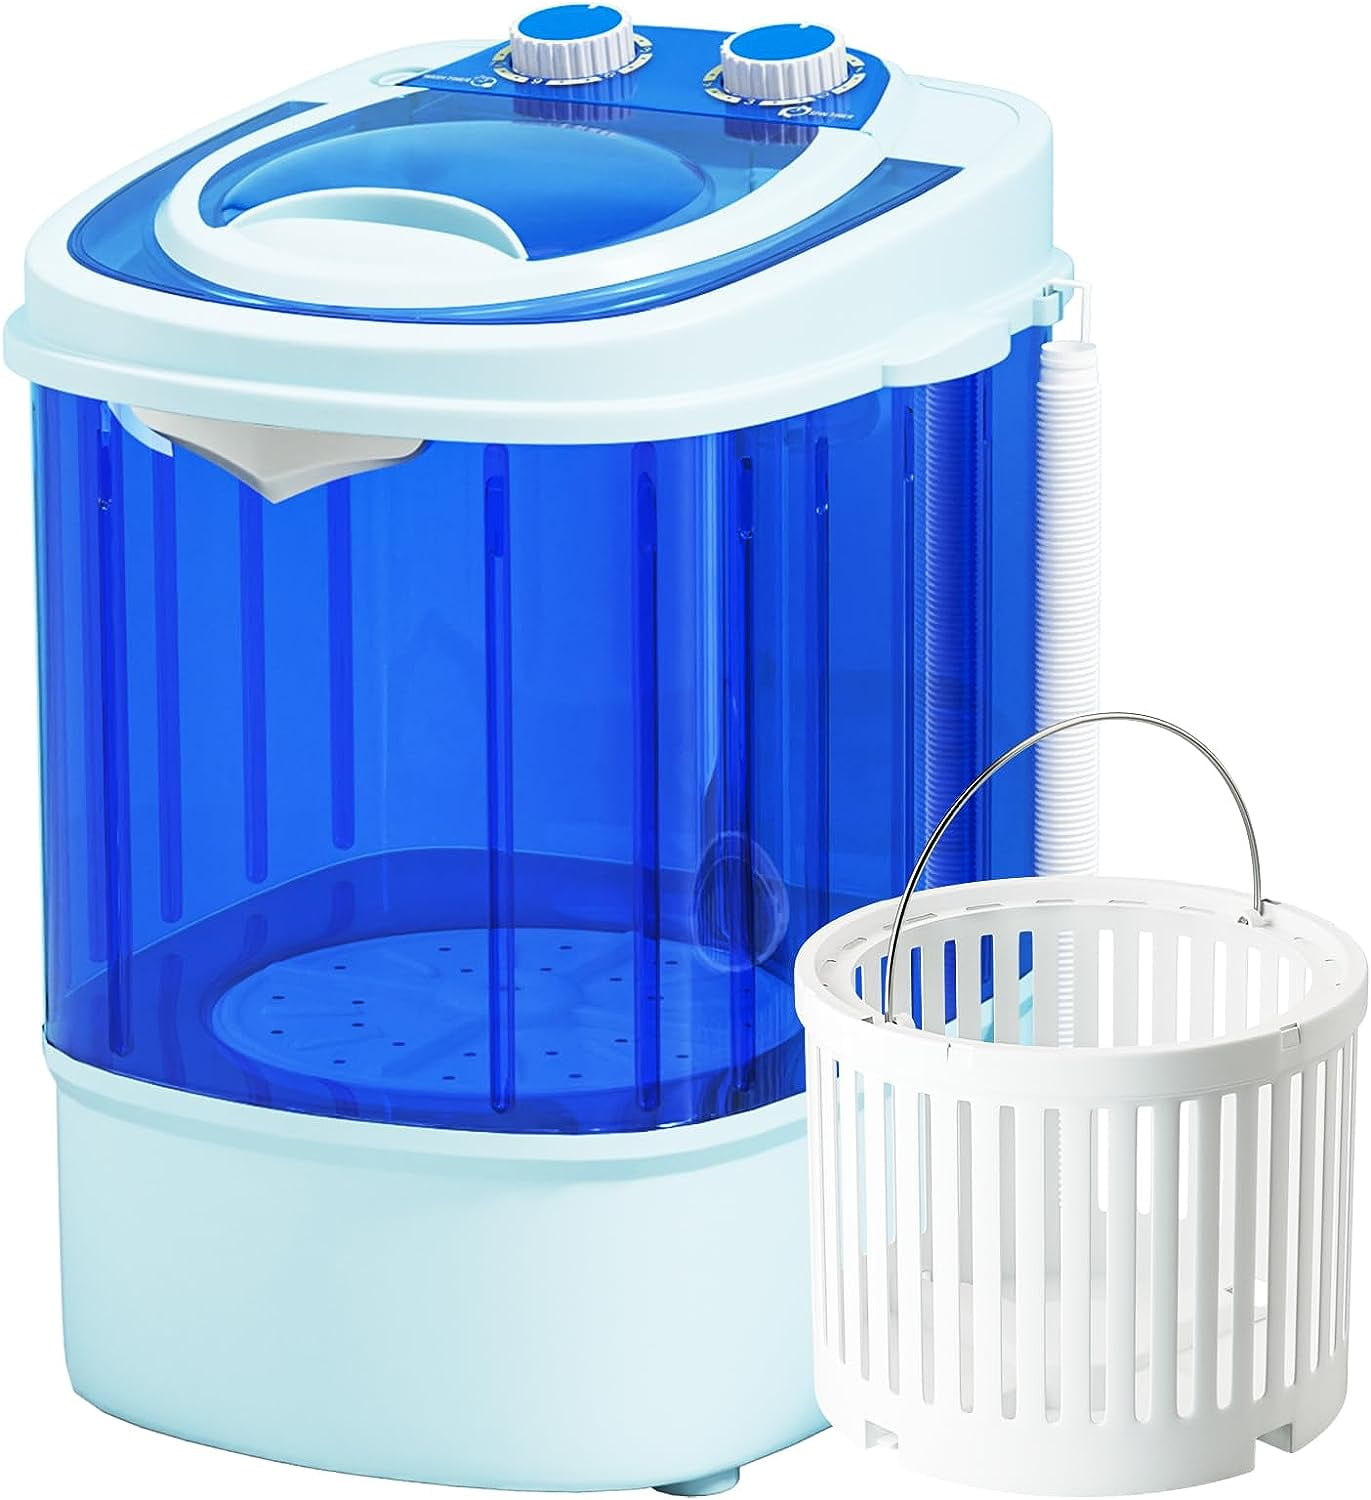 MILTON Collapsible 18 Plastic Foldable Bucket, 17 Litres, Blue 17 L Plastic  Bucket Price in India - Buy MILTON Collapsible 18 Plastic Foldable Bucket,  17 Litres, Blue 17 L Plastic Bucket online at